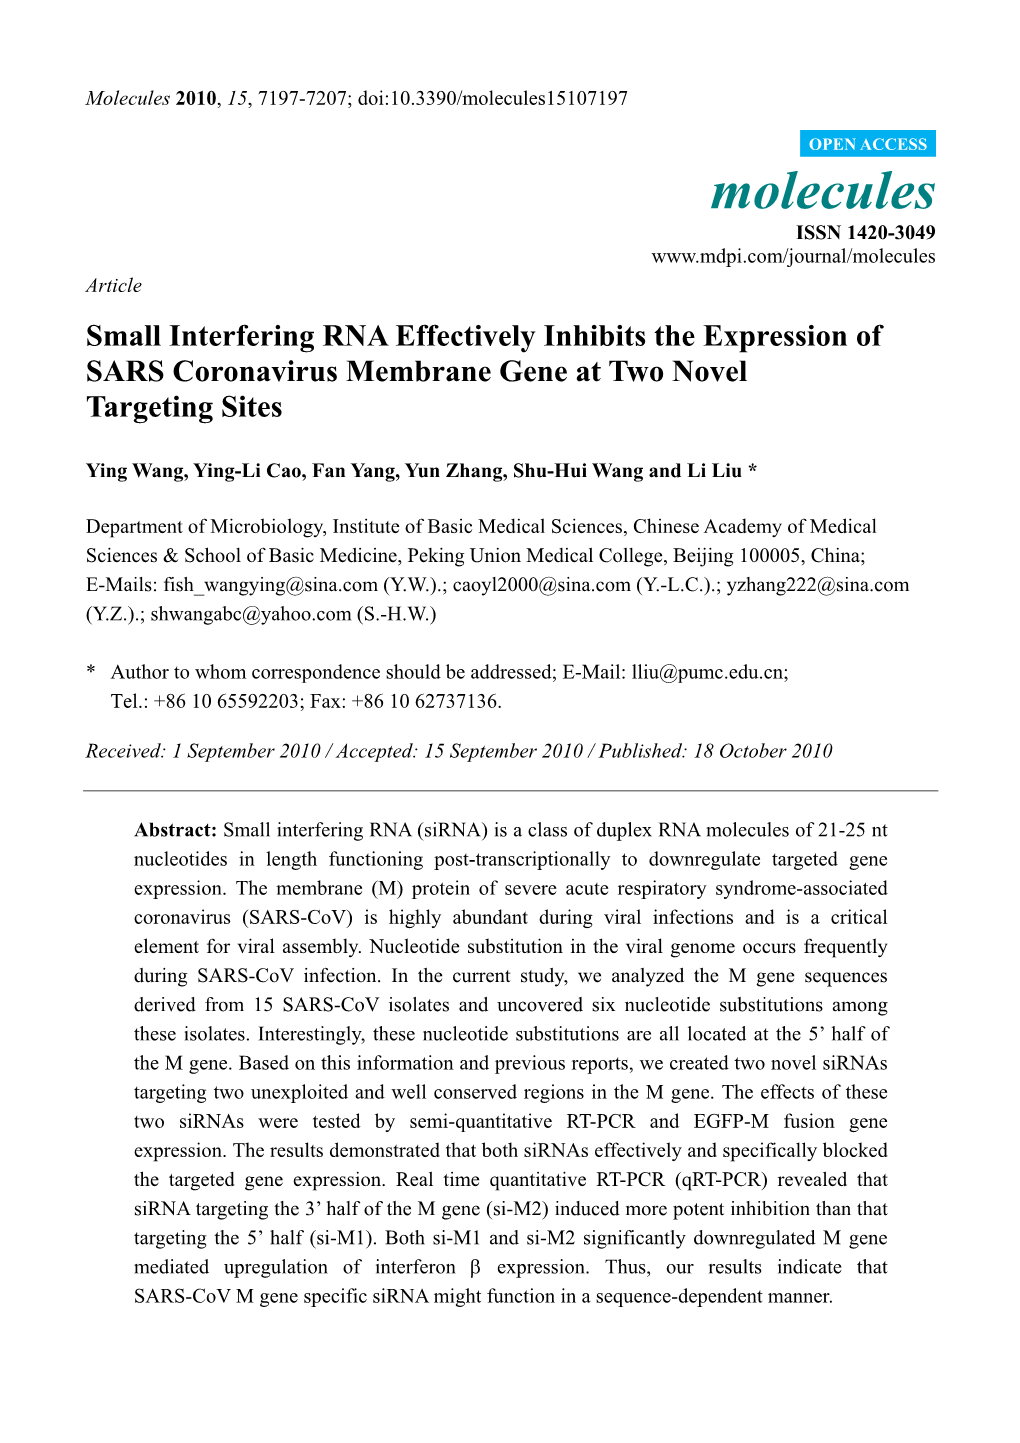 Small Interfering RNA Effectively Inhibits the Expression of SARS Coronavirus Membrane Gene at Two Novel Targeting Sites